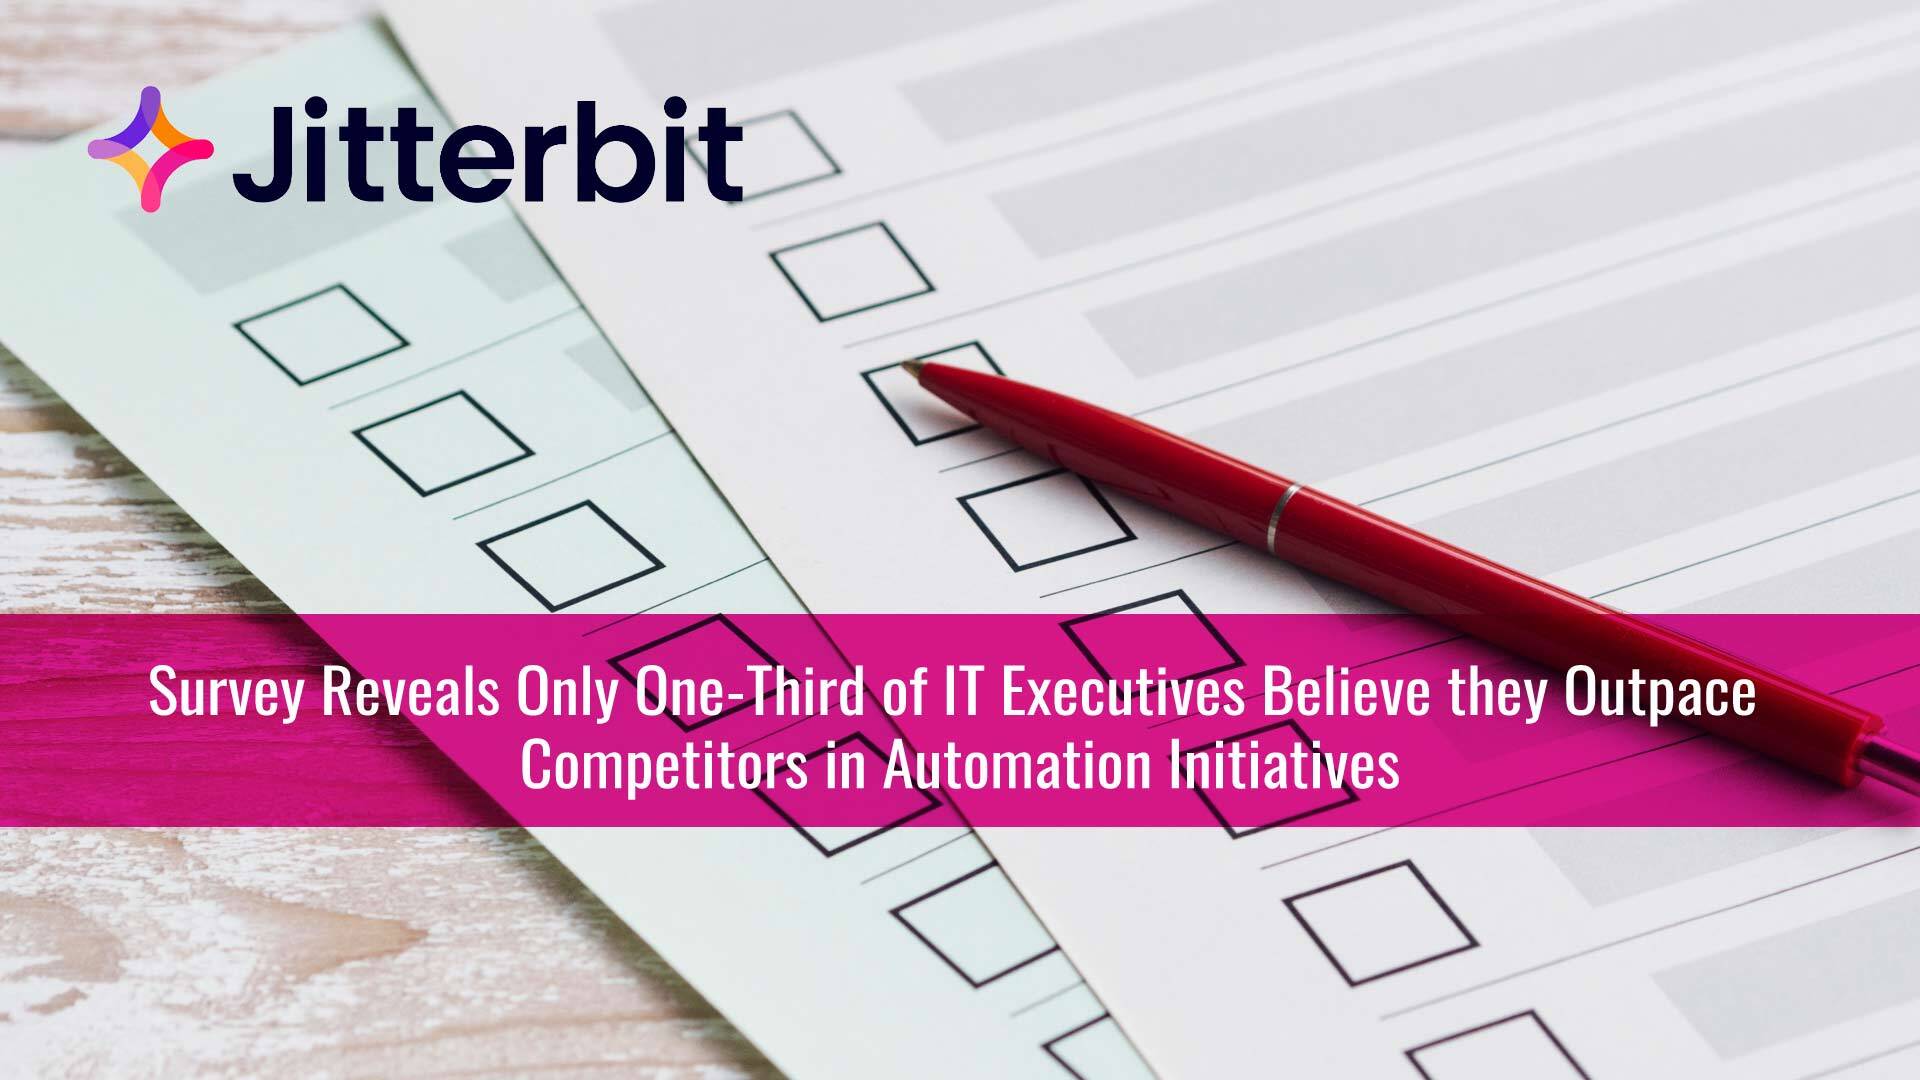 Jitterbit Survey Reveals Only One-Third of IT Executives Believe they Outpace Competitors in Automation Initiatives